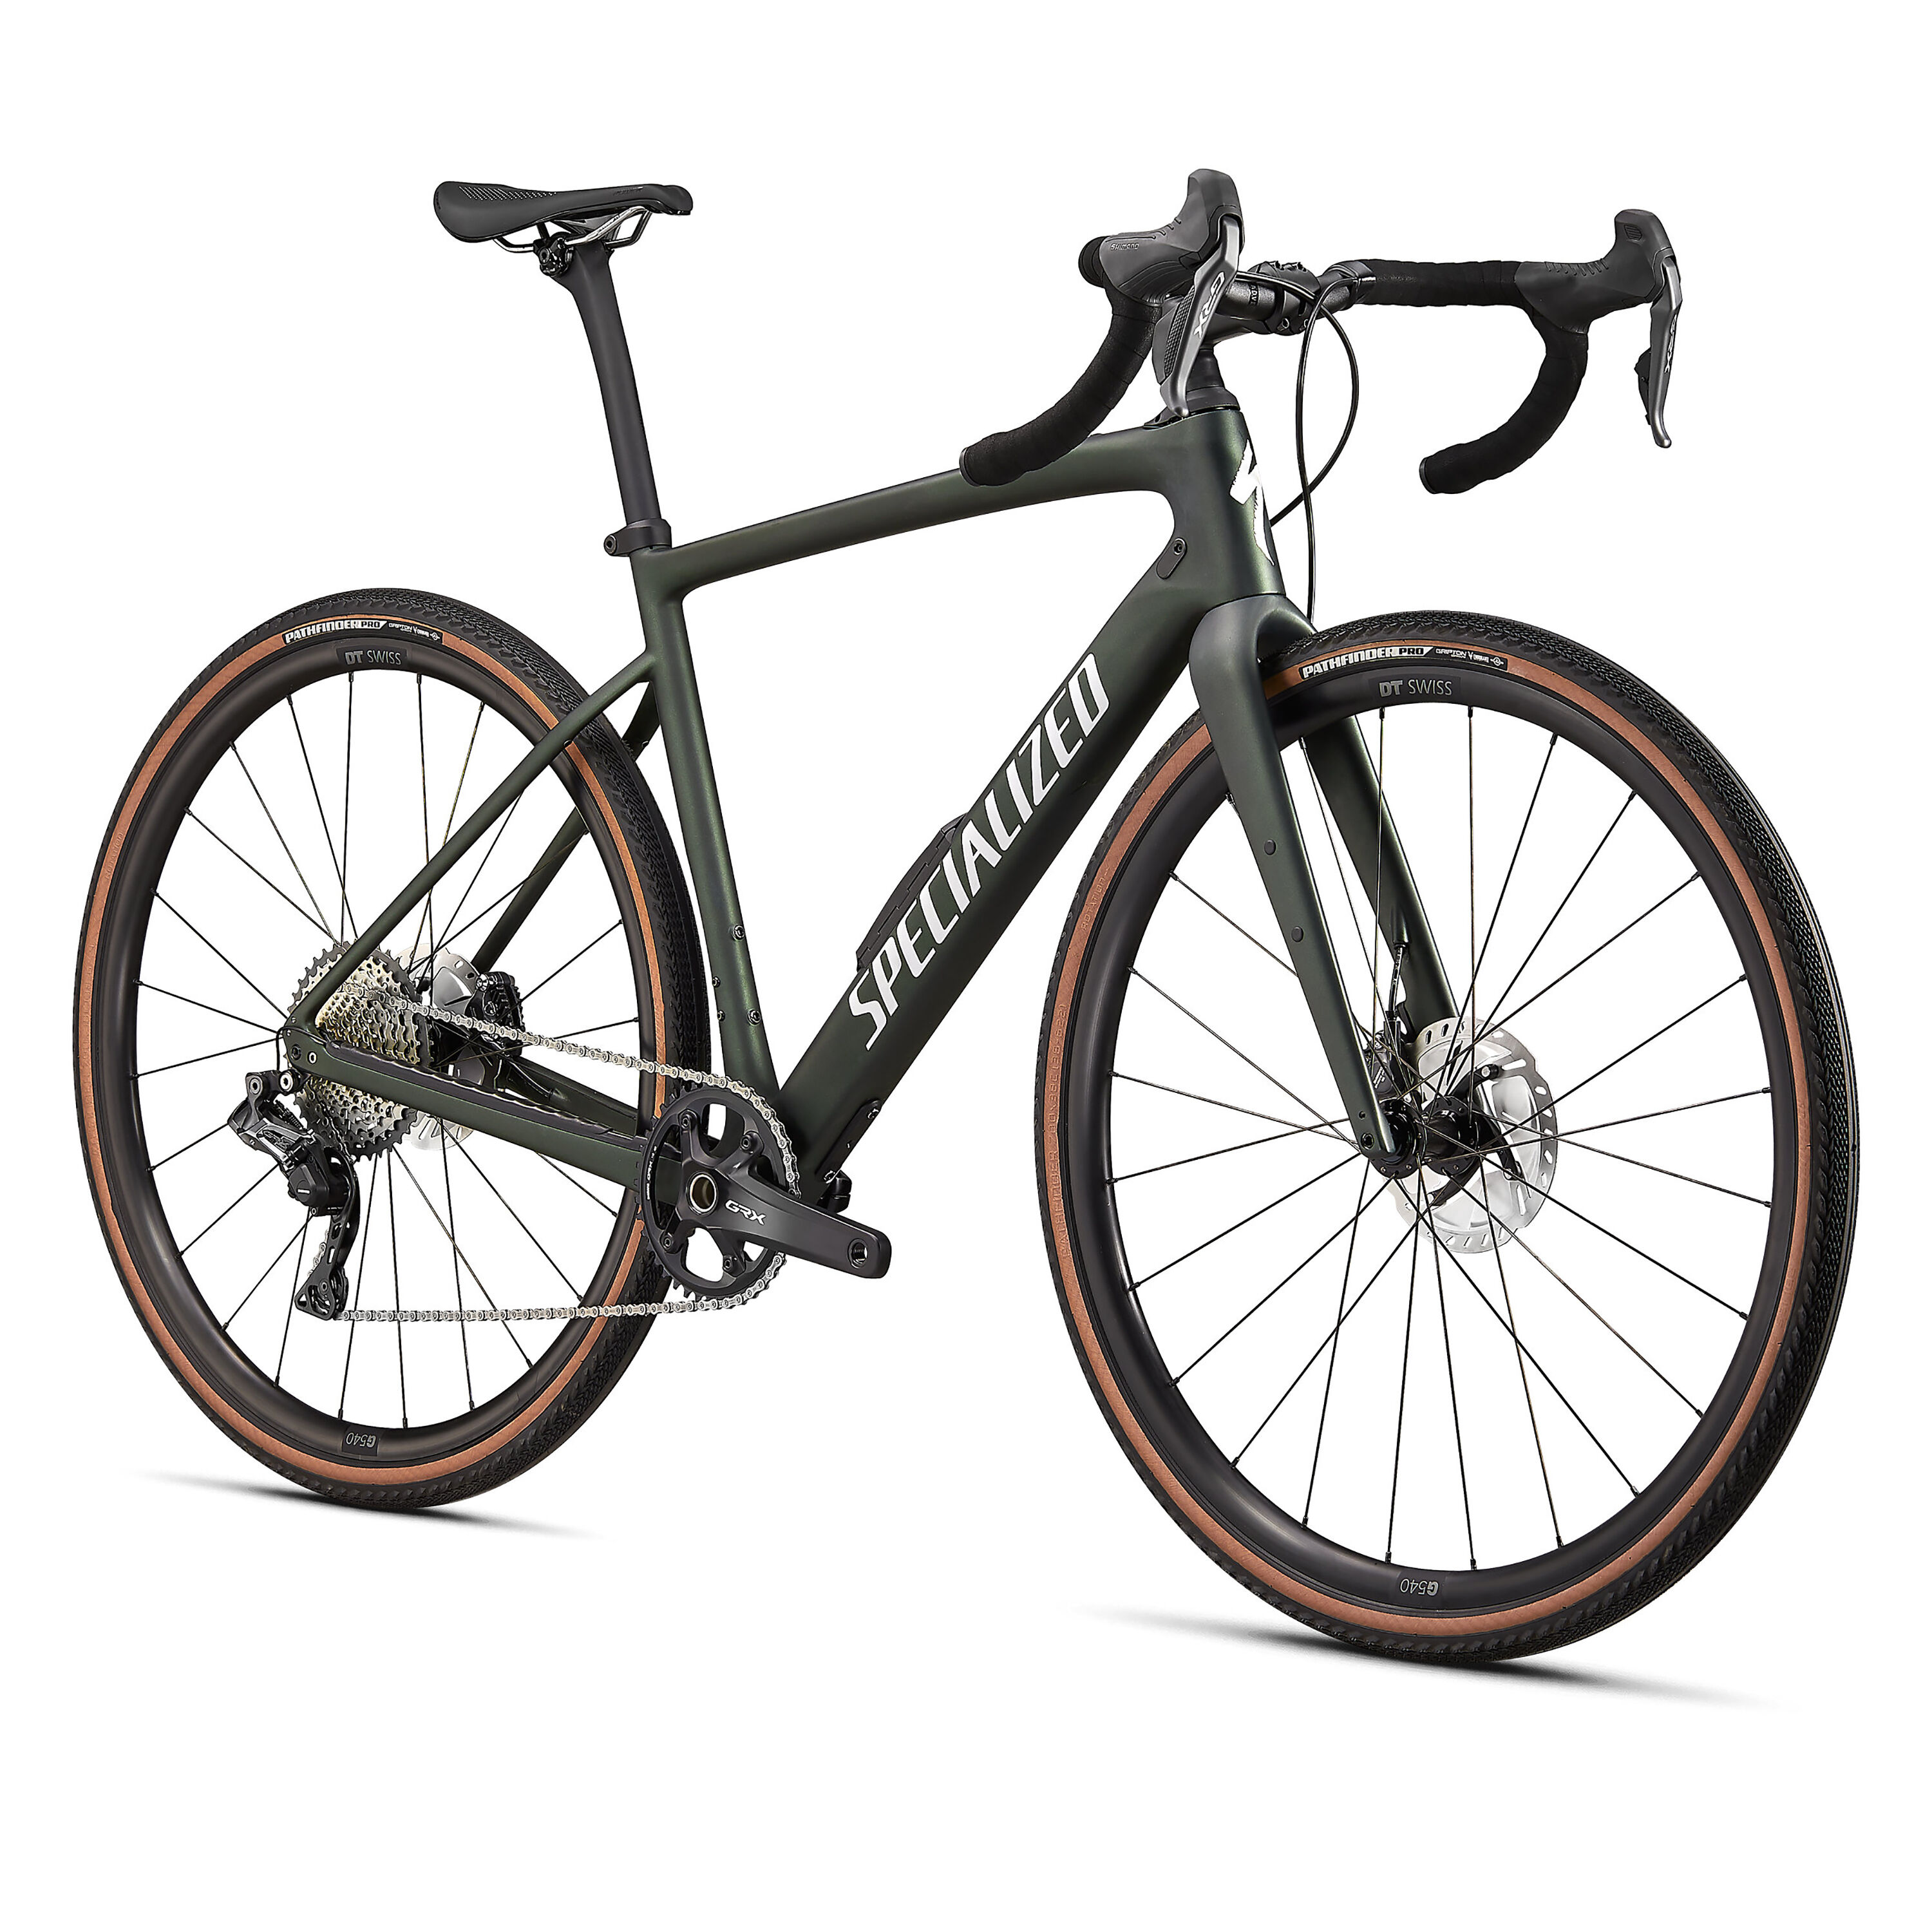 Specialized Diverge Expert Carbon LordGun online bike store